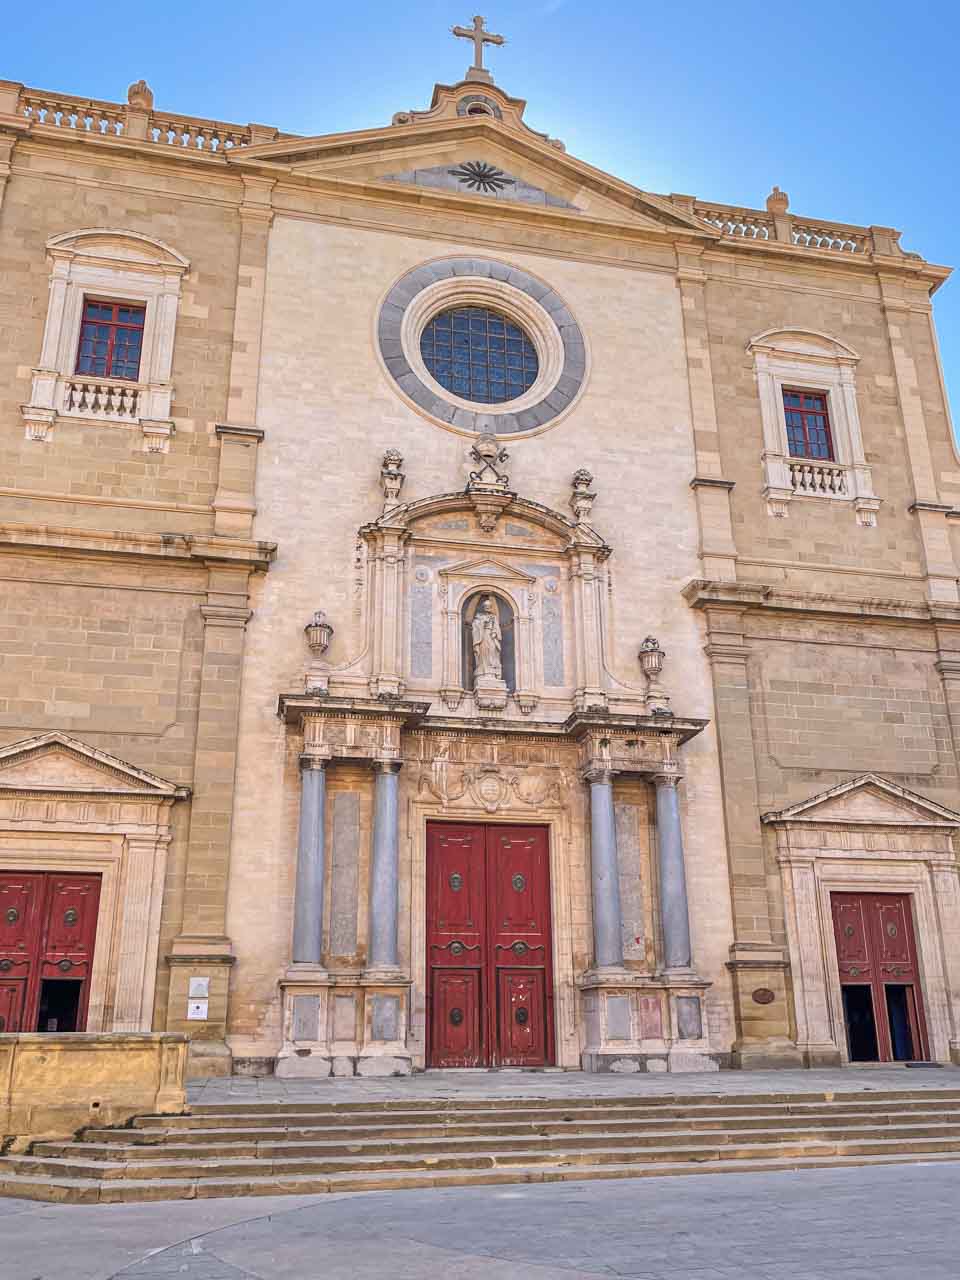 The stone front facade of a cathedral with red wooden doors.